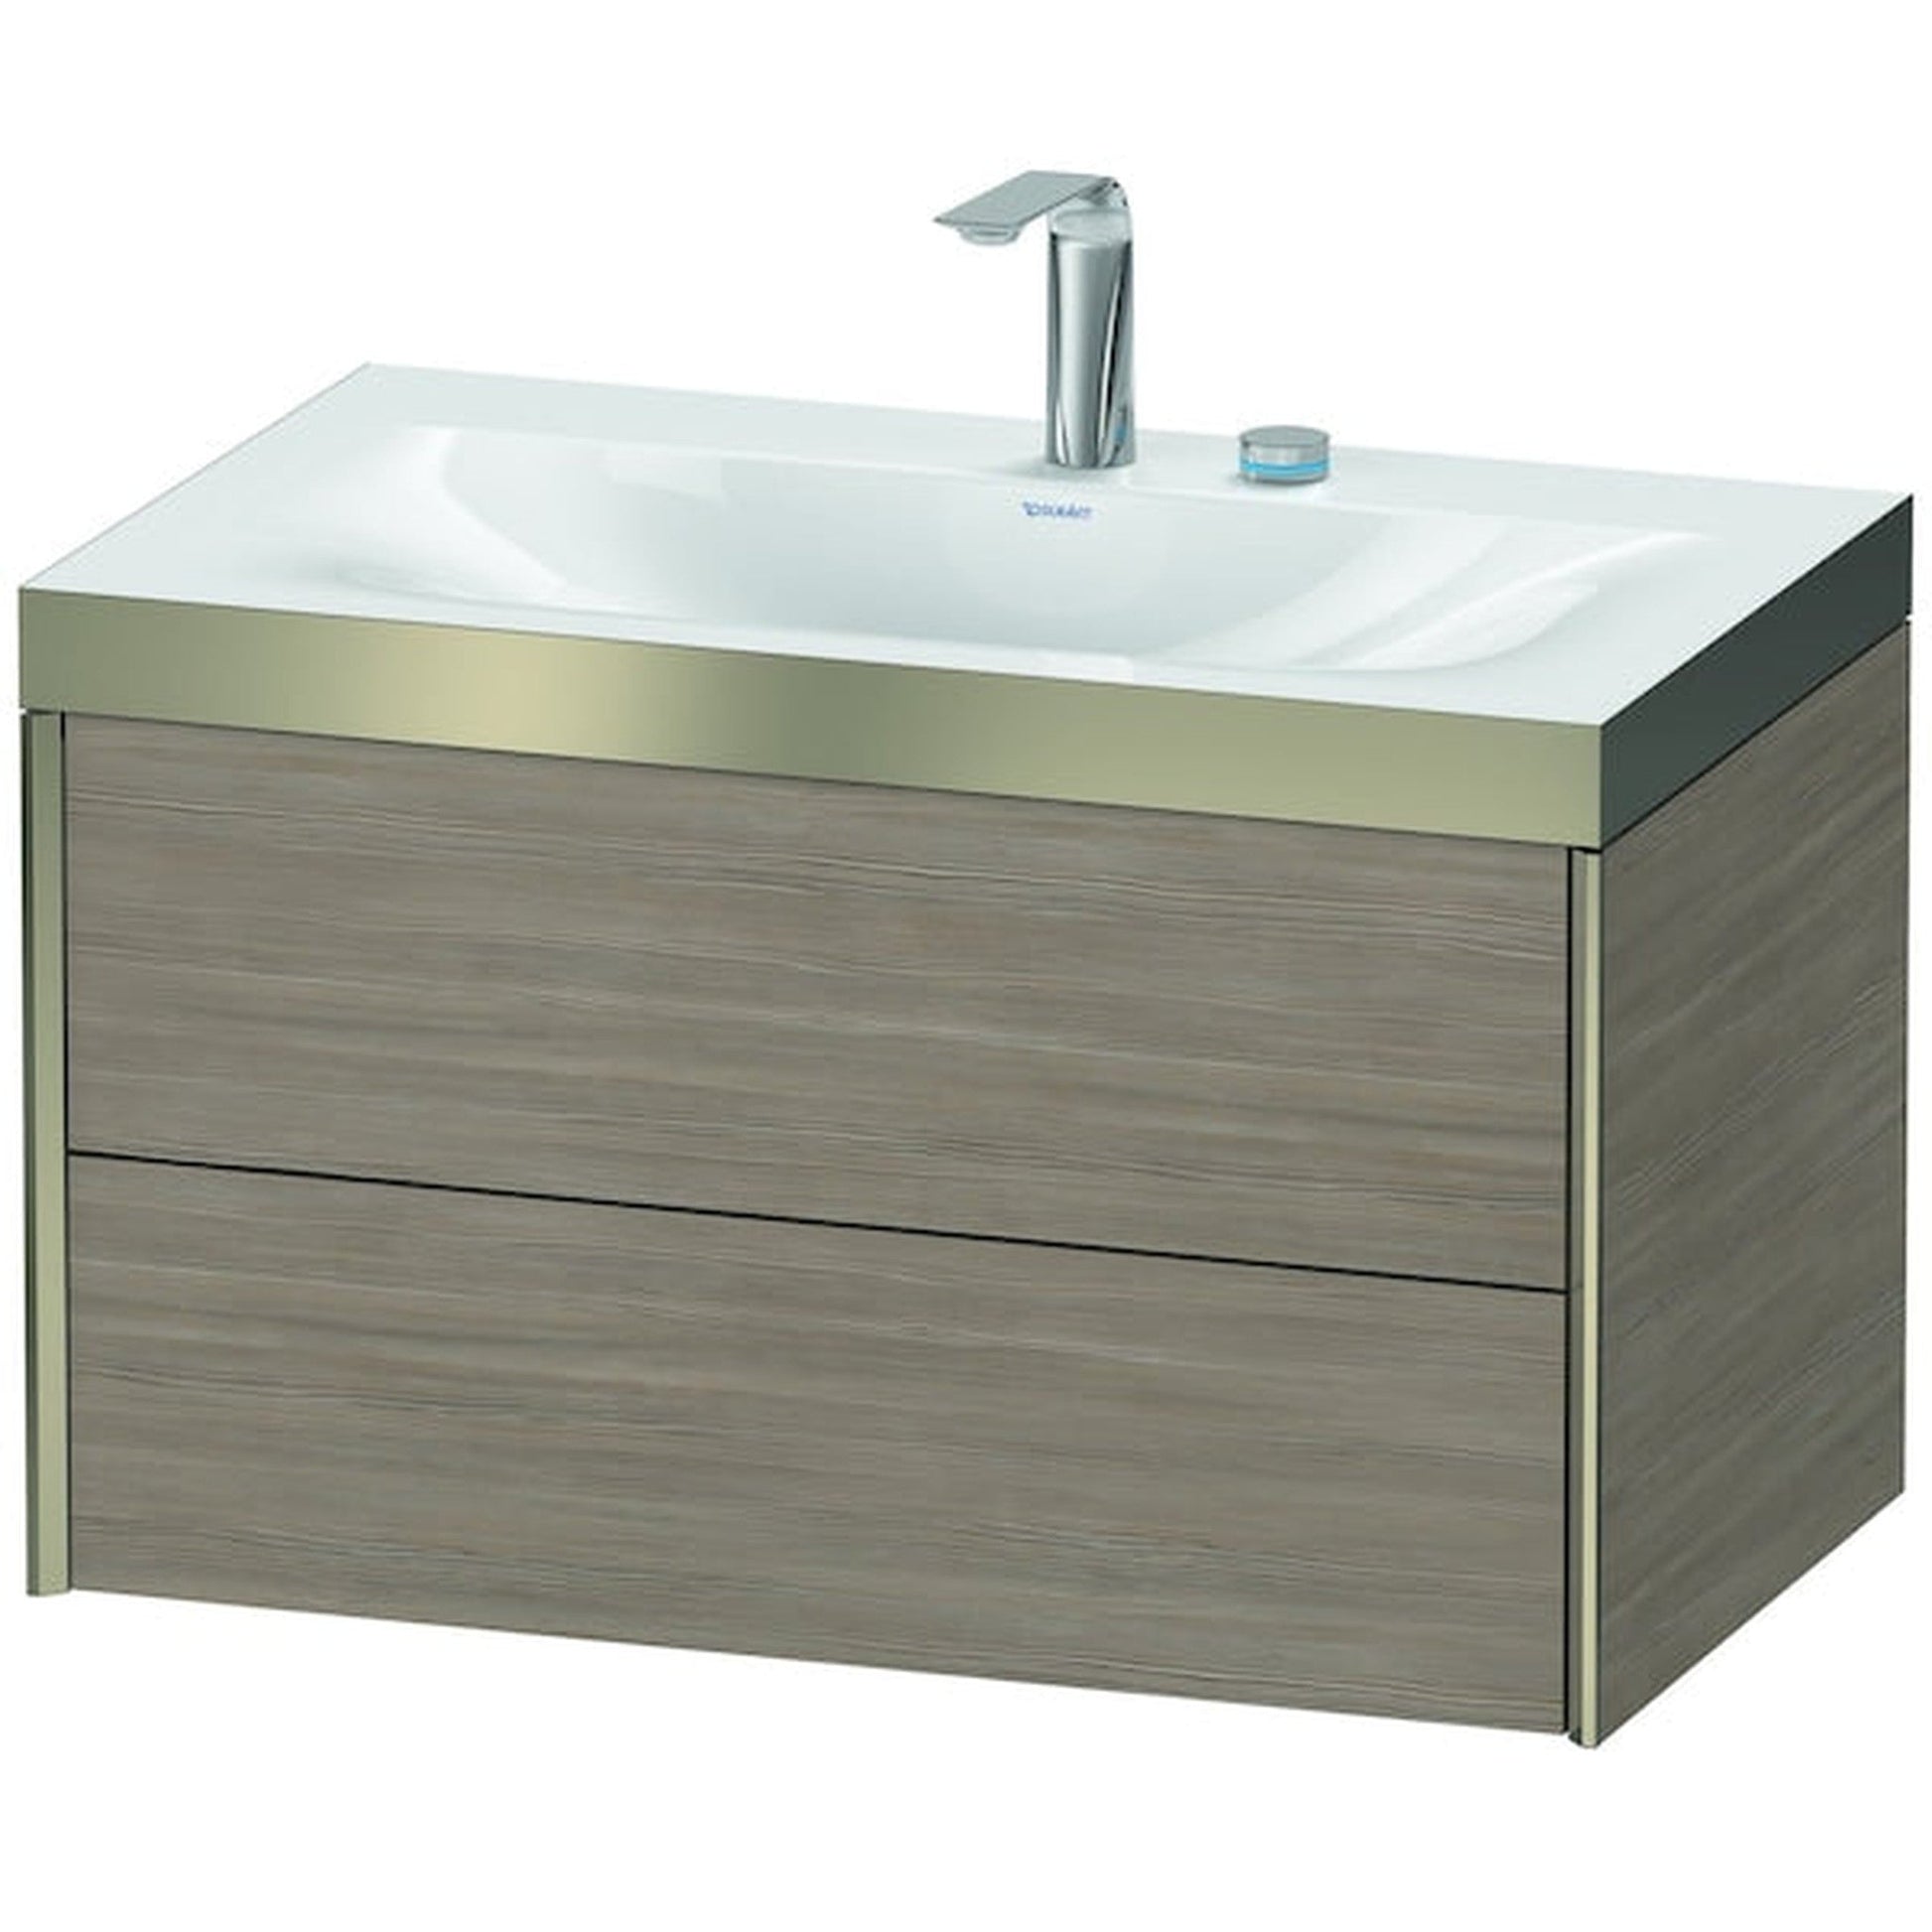 Duravit Xviu 31" x 20" x 19" Two Drawer C-Bonded Wall-Mount Vanity Kit With Two Tap Holes, Silver Pine (XV4615EB131P)